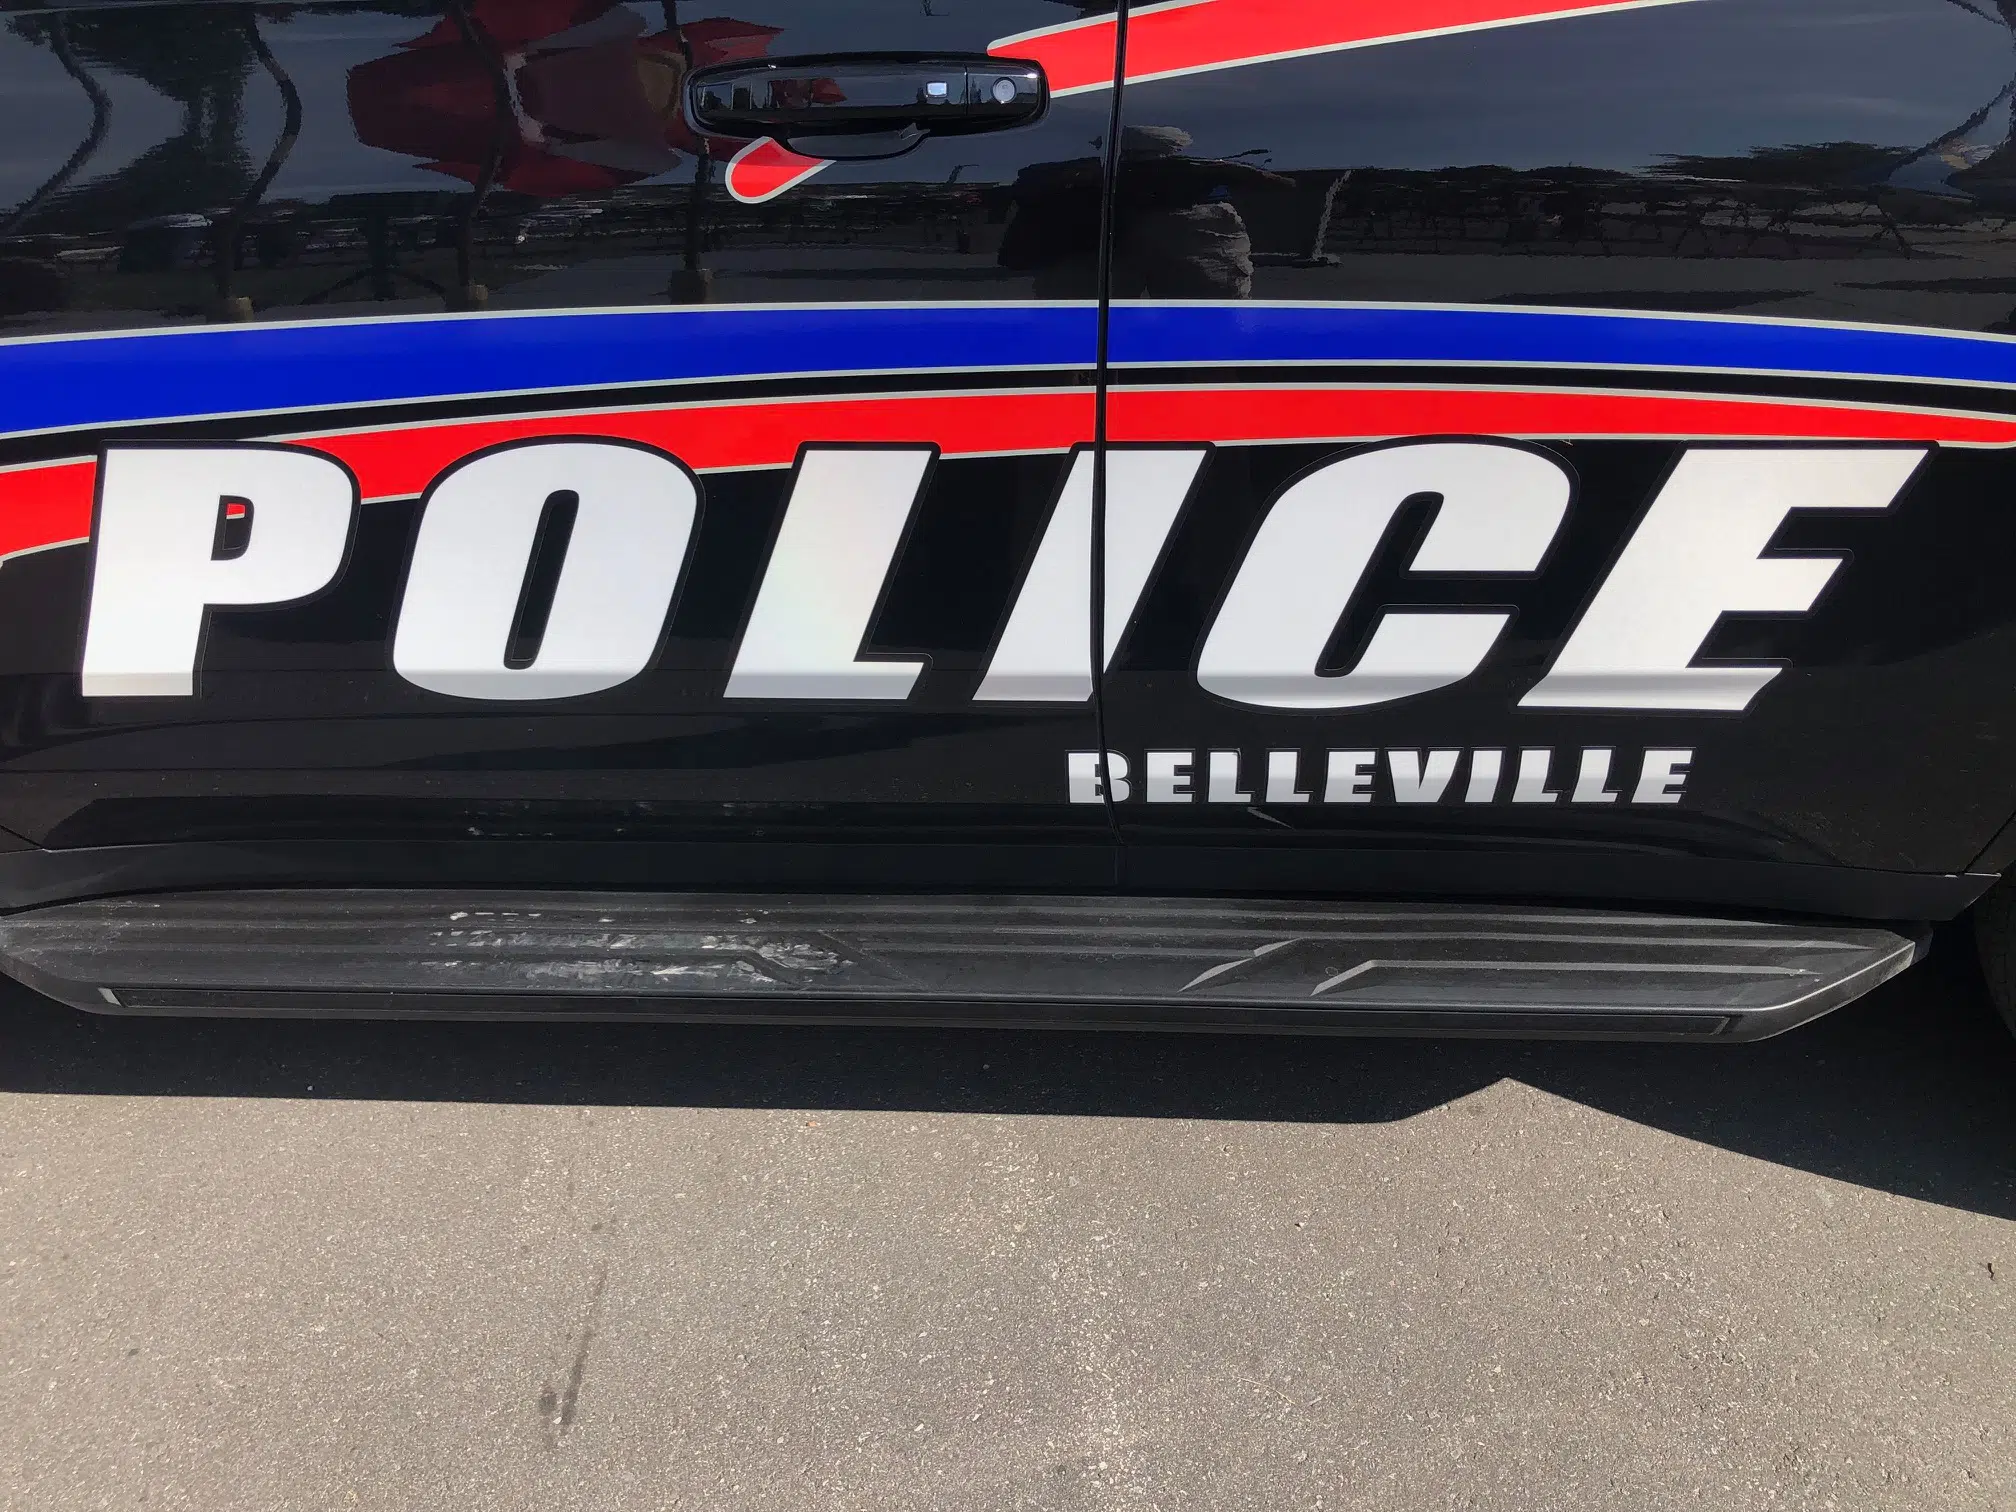 Belleville man facing multiple weapons charges following domestic incident